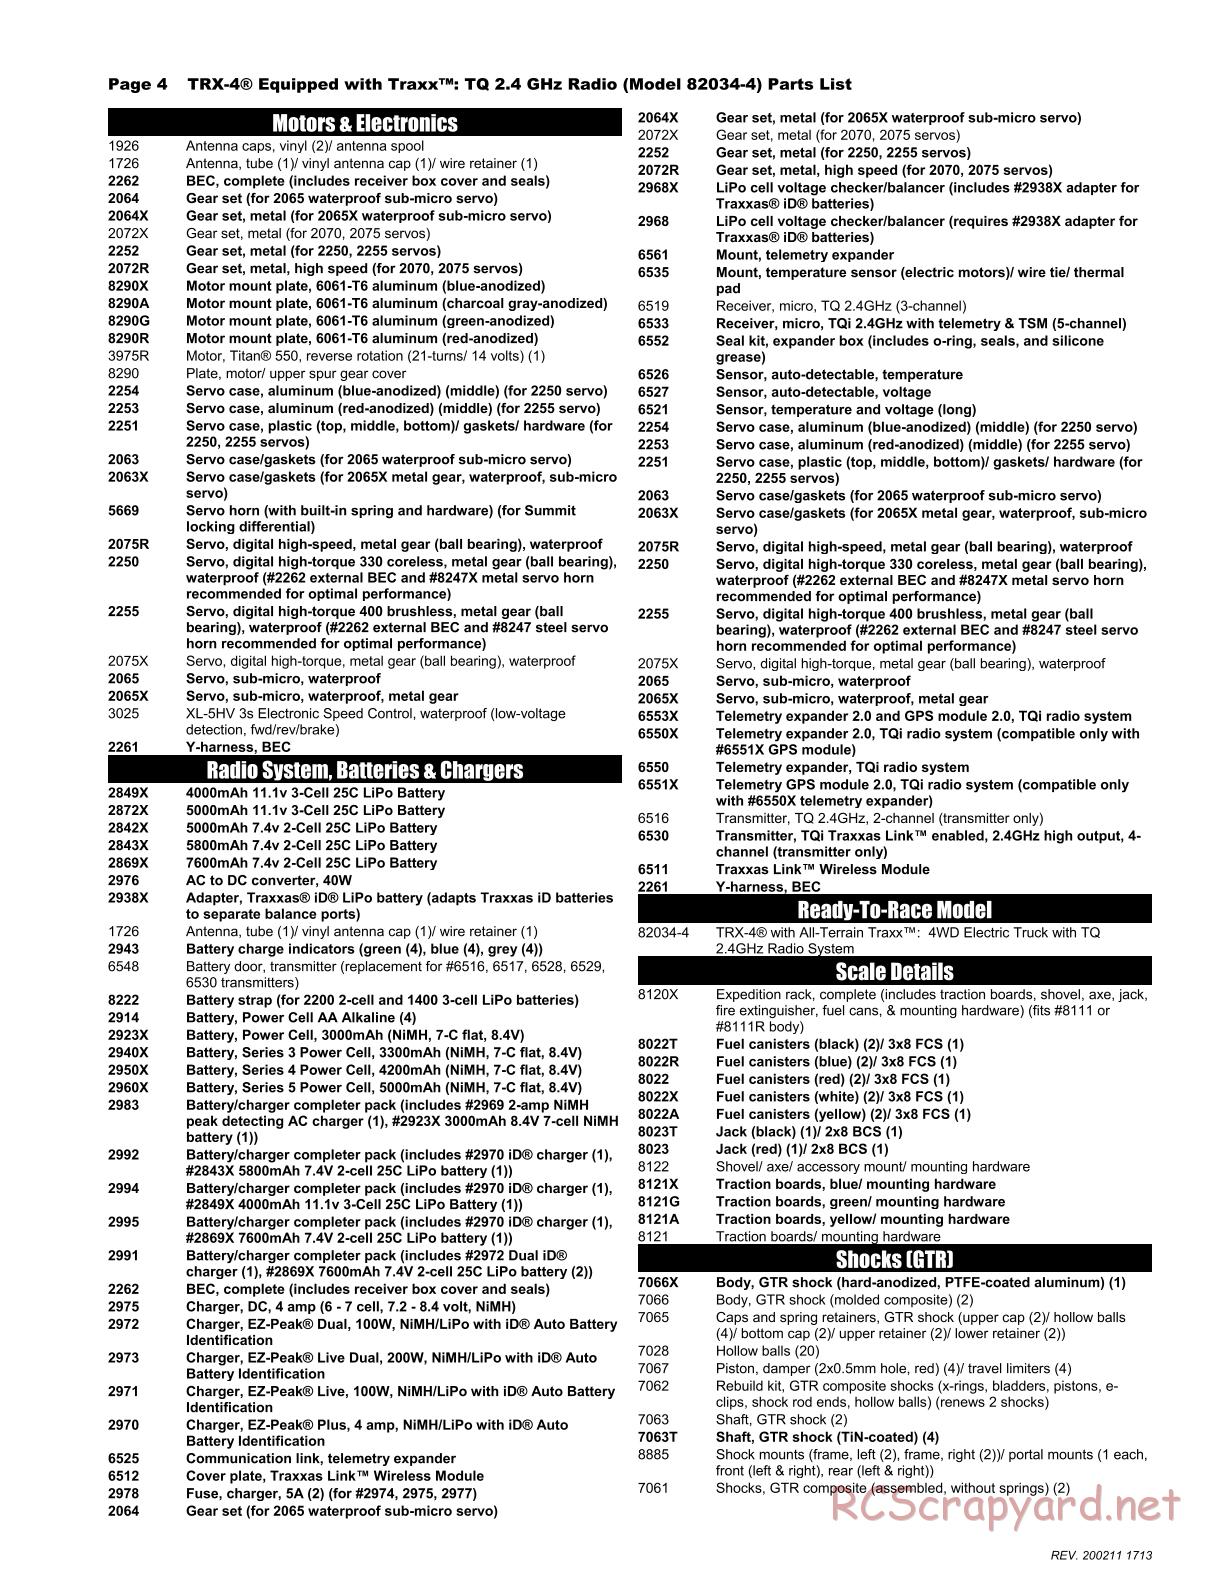 Traxxas - TRX-4 Equipped with Traxx - Parts List - Page 4